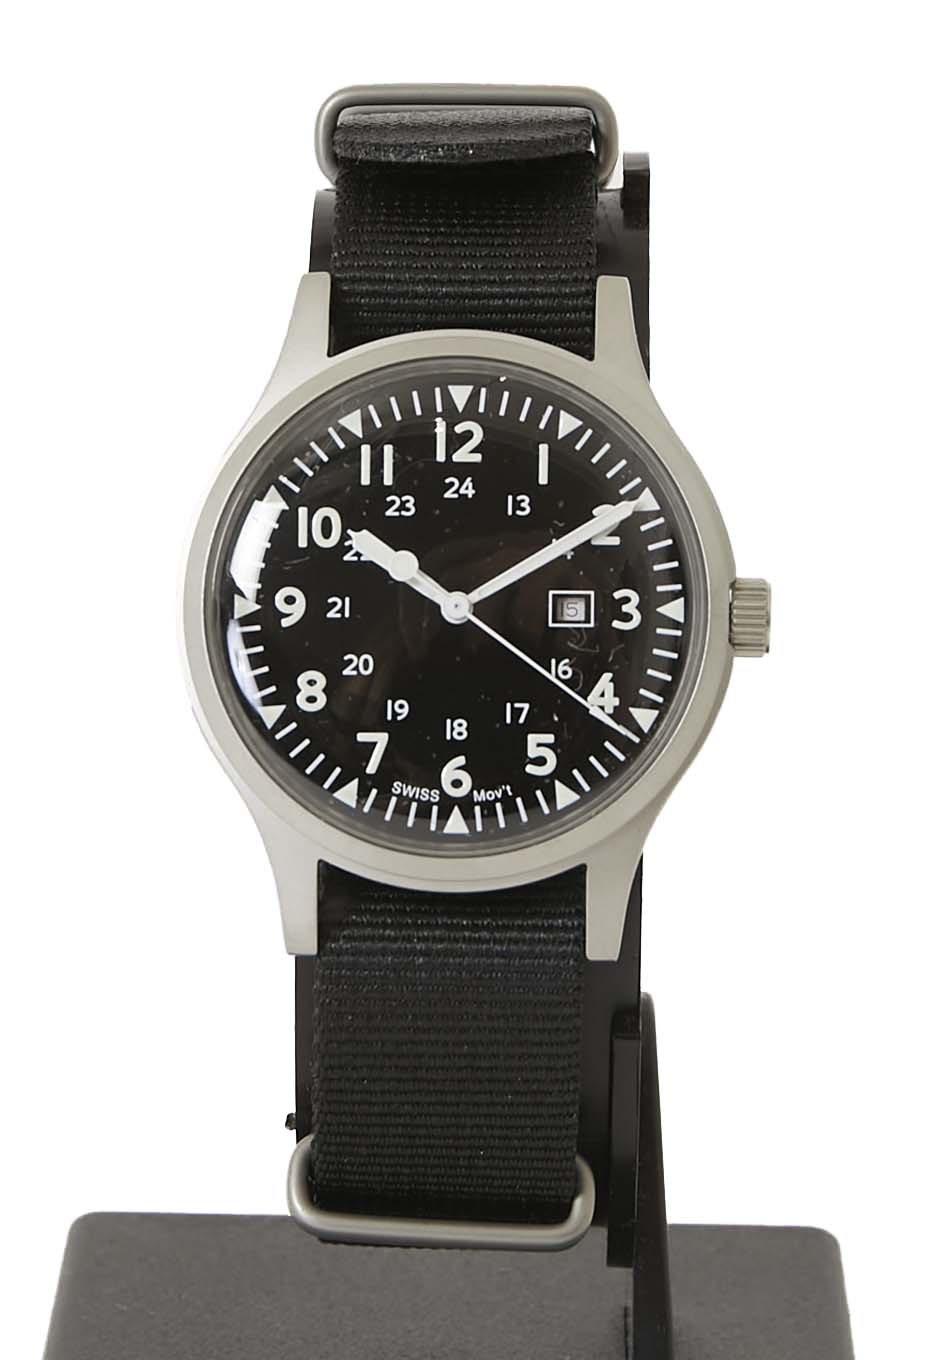 NAVAL WATCH Mil-01 US FORCE type watch